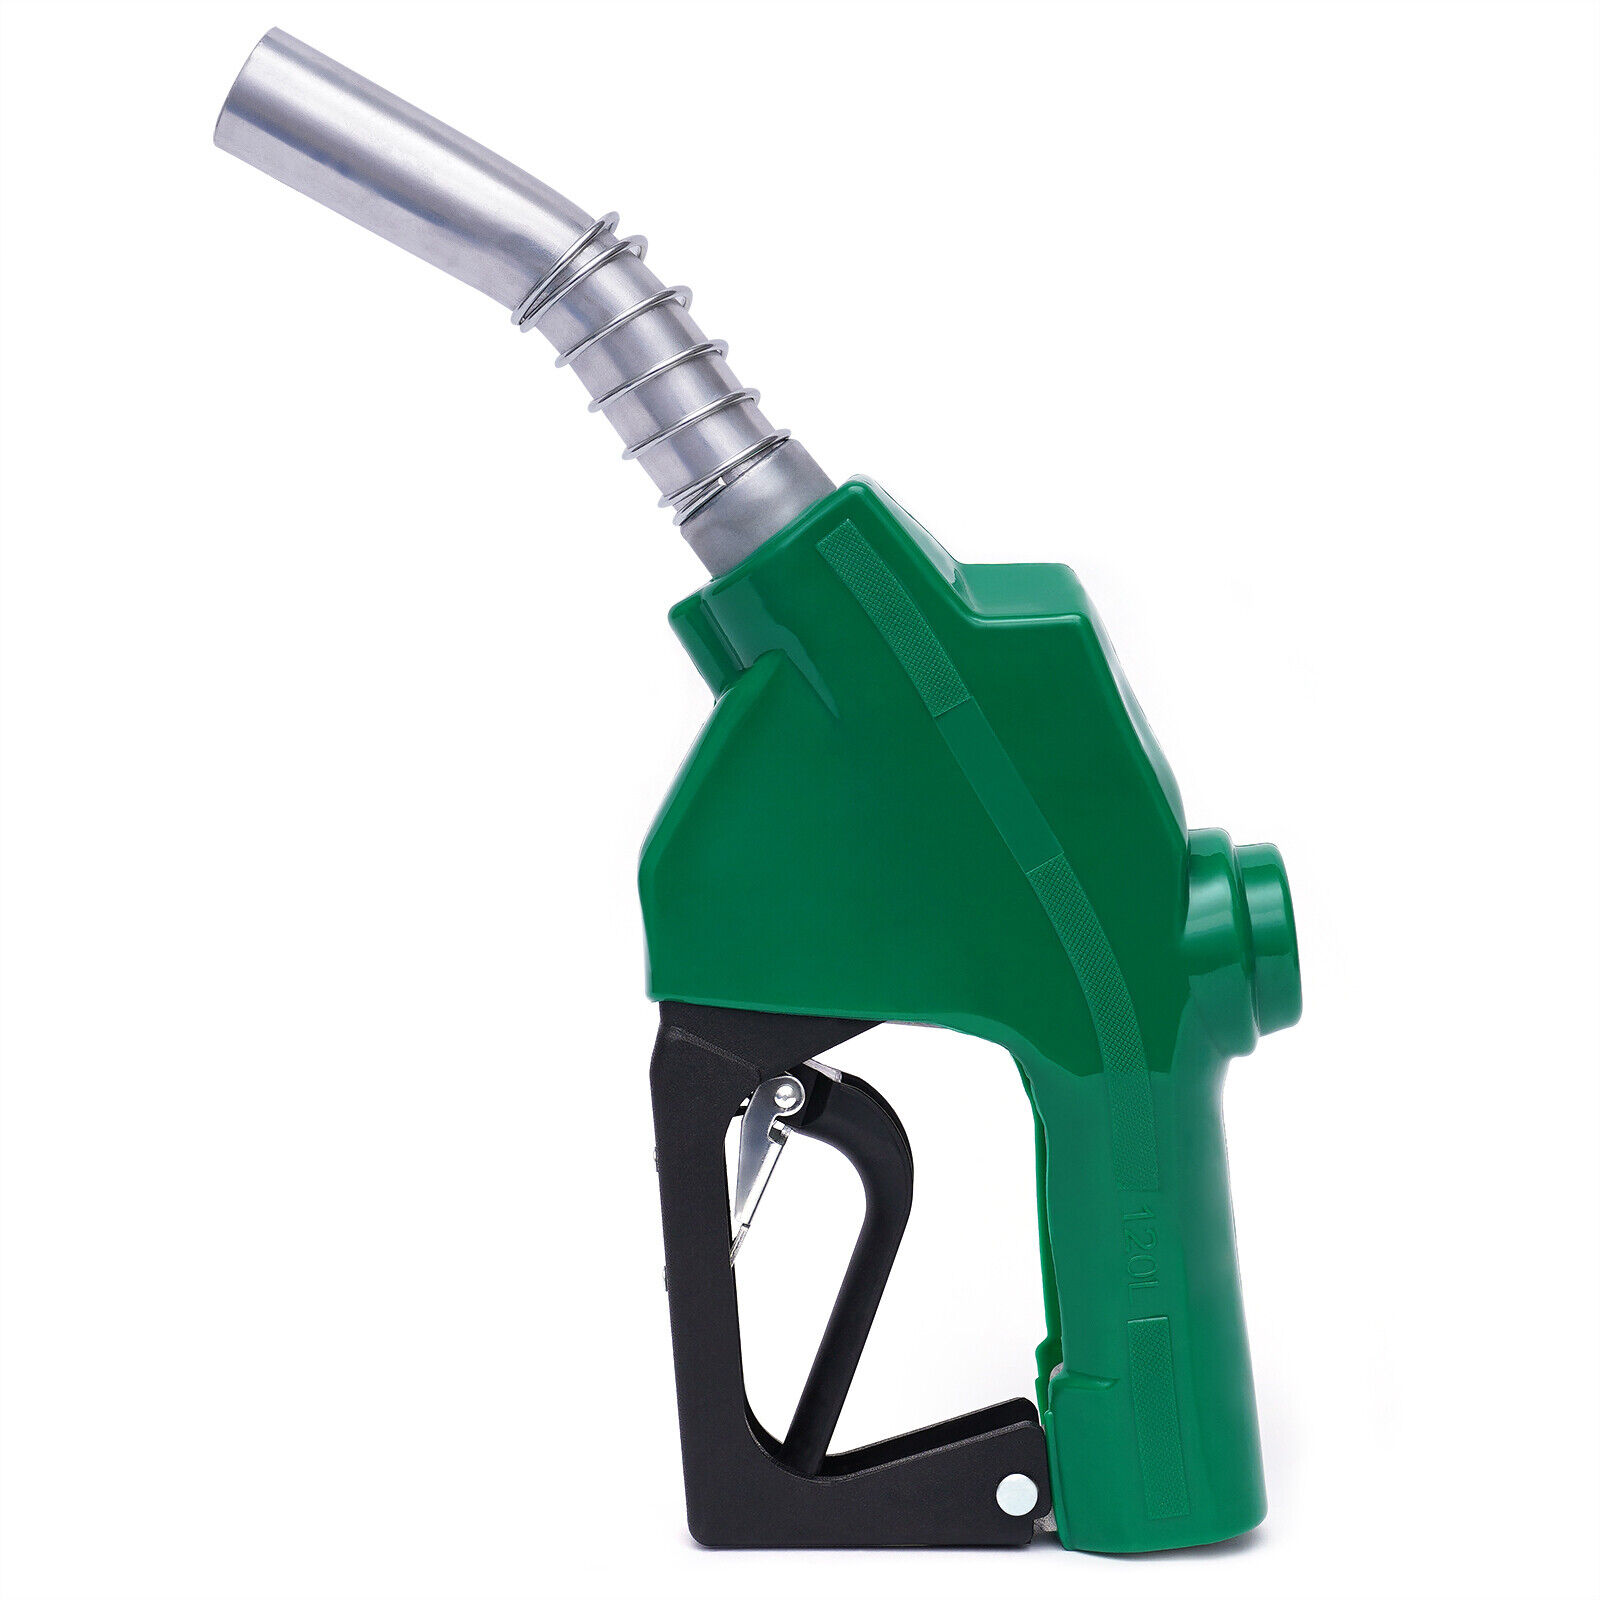 1 Inch Automatic Fuel Oil Pump Transfer Nozzle 7H Green Gas Refueling Tool - image 4 of 12